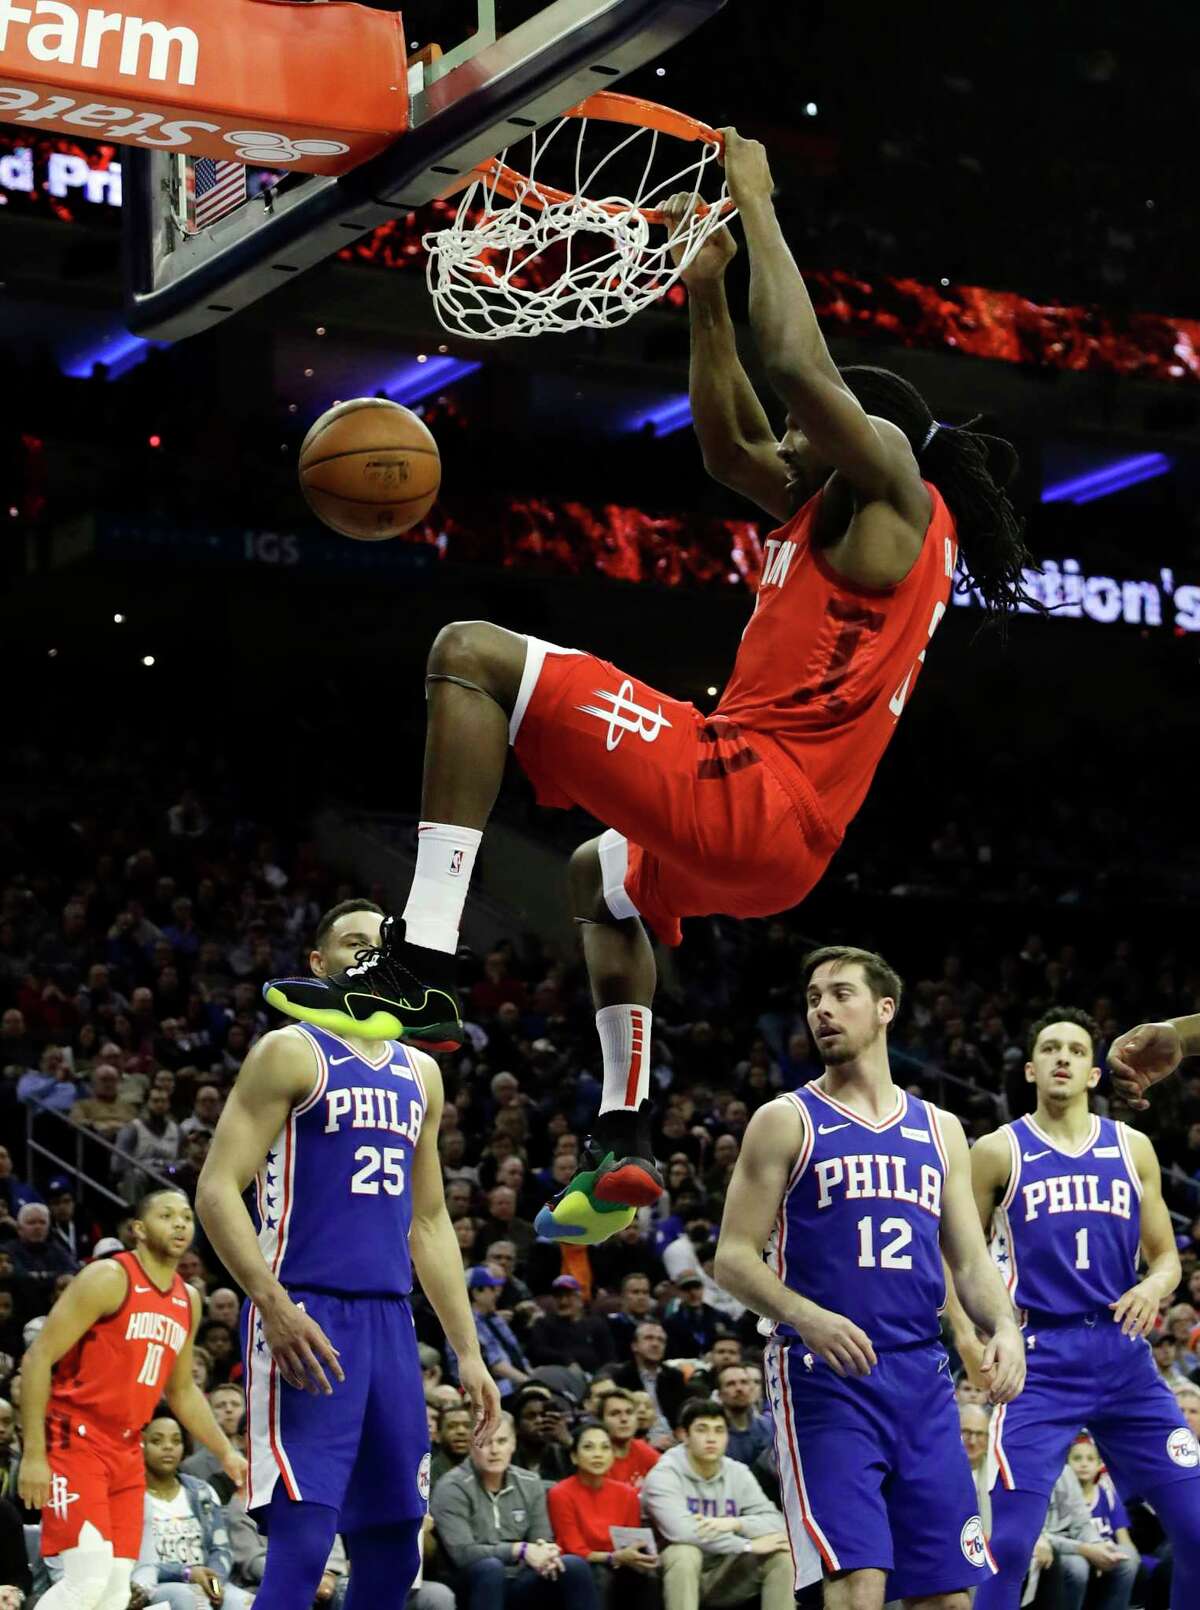 Houston Rockets' Kenneth Faried (35) dunks the ball as Philadelphia 76ers' Ben Simmons (25) , T.J. McConnell (12) and Landry Shamet (1) look on during the first half of an NBA basketball game, Monday, Jan. 21, 2019, in Philadelphia. (AP Photo/Matt Slocum)